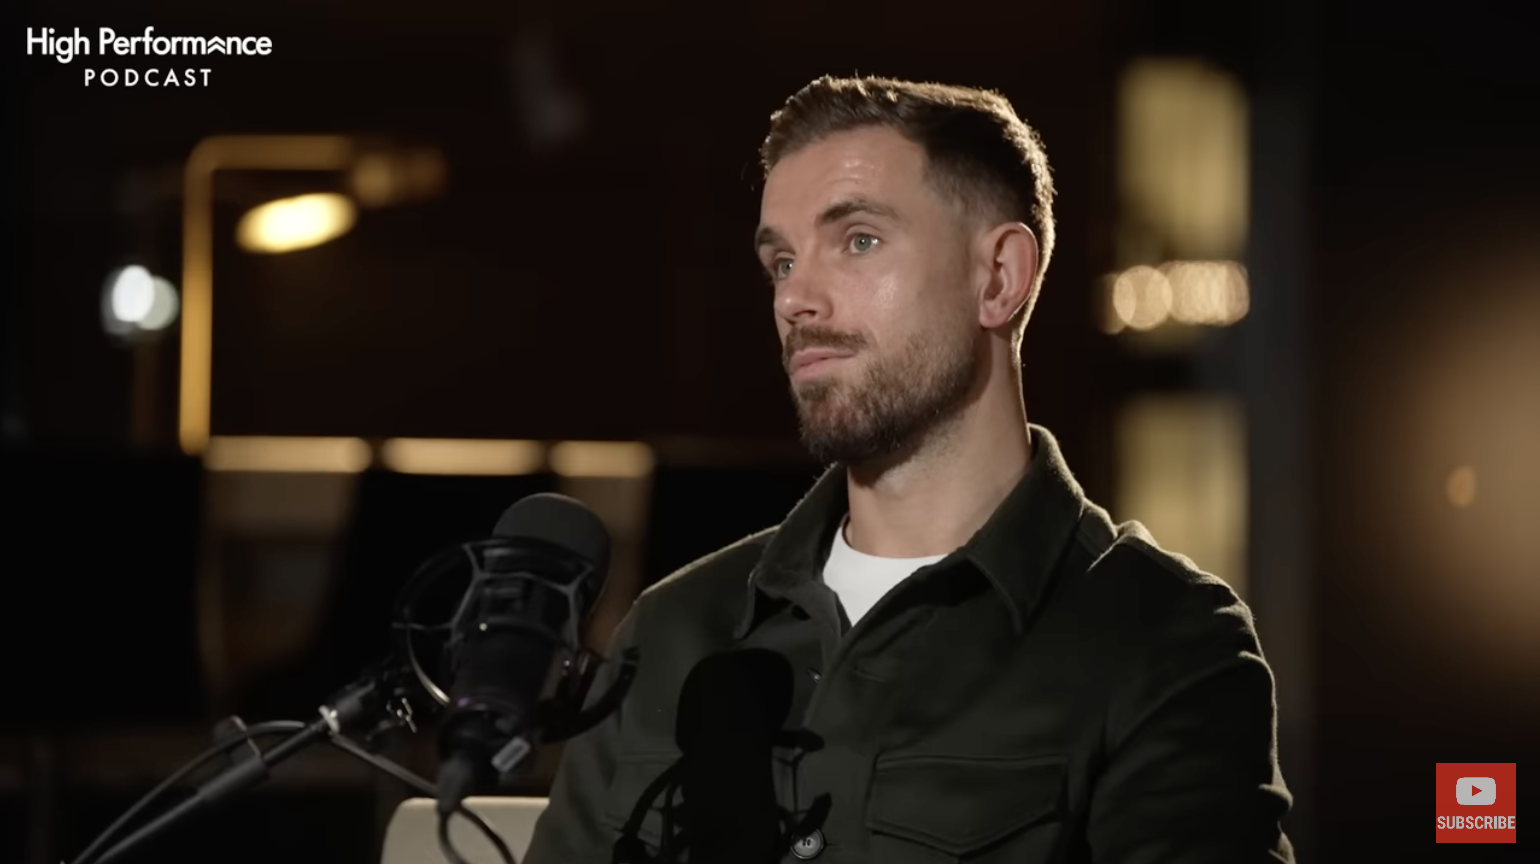 Jordan Henderson on the High Performance Podcast – The Untold Story Of A Champions League Winner